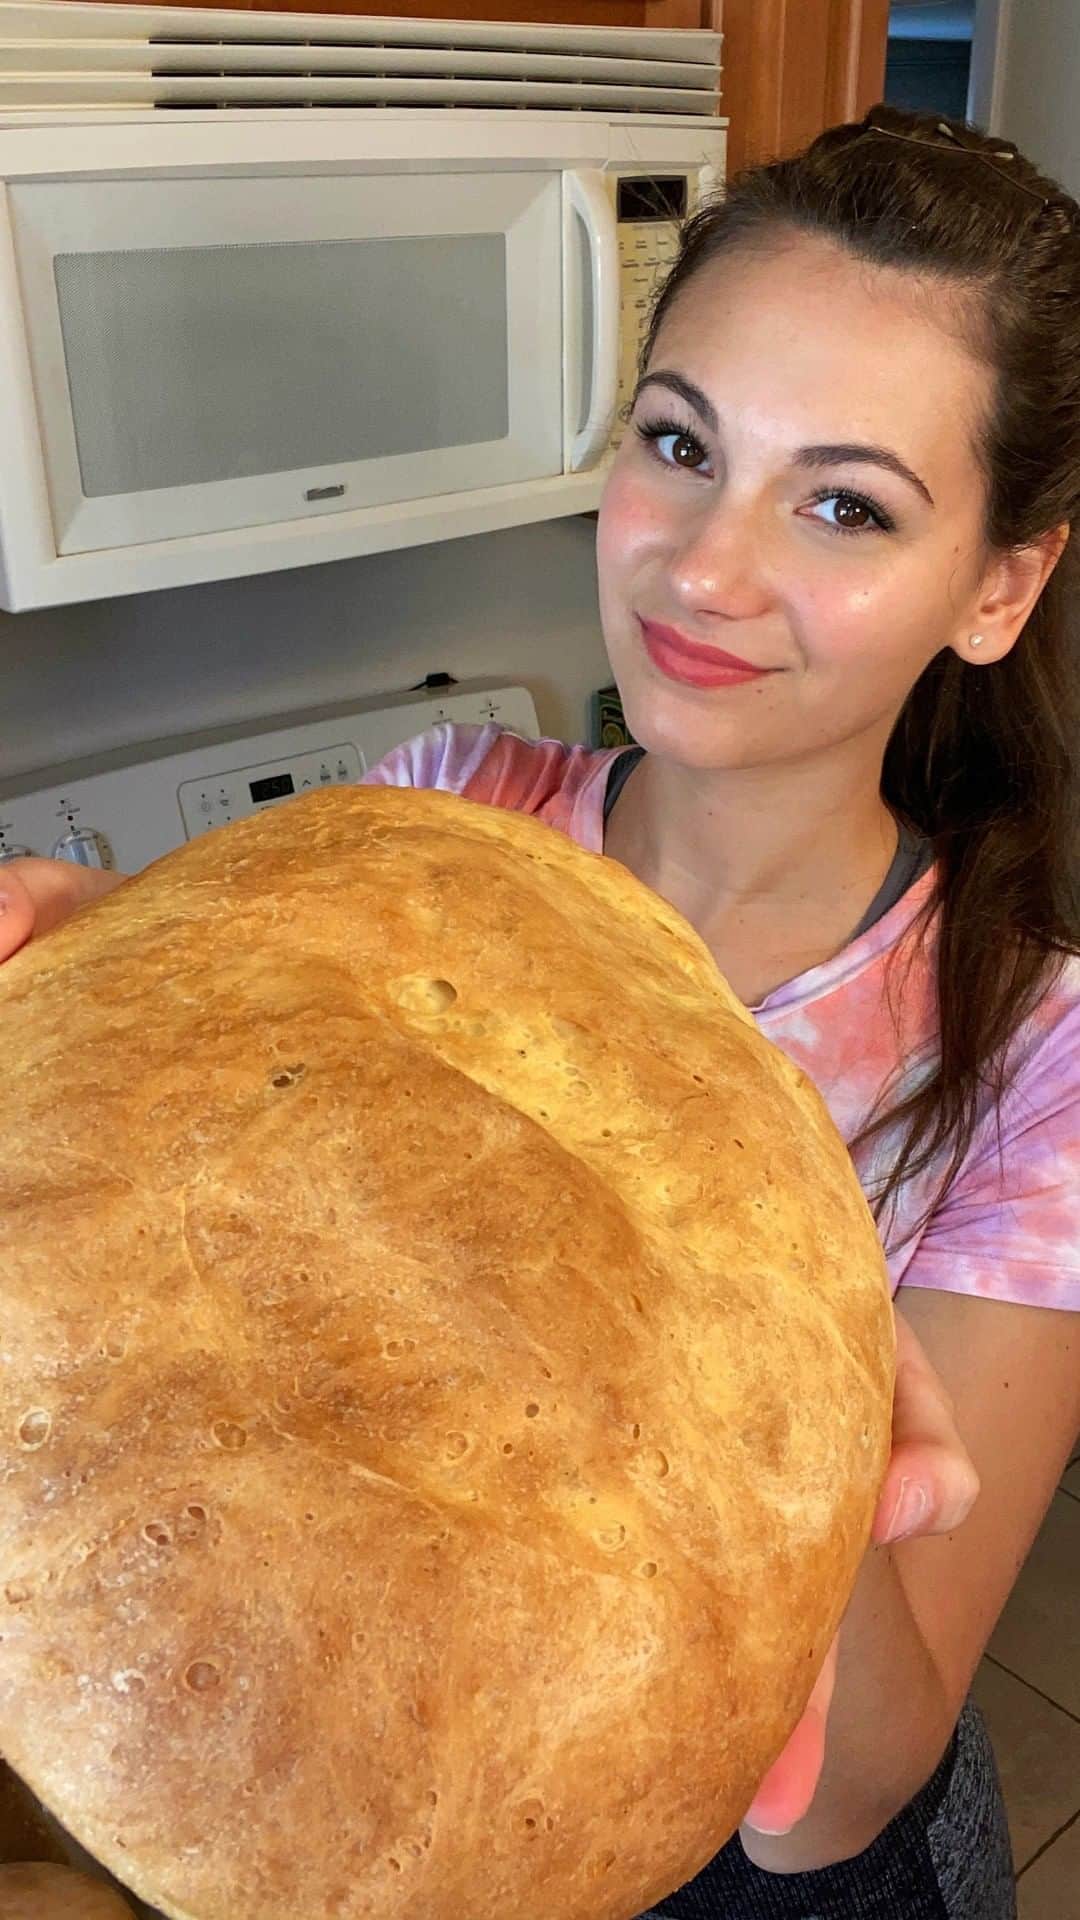 Alexia Rayeのインスタグラム：「The long awaited video of how I make bread at home *~*  You'll need: 2 Tbsp Instant Yeast 1/2 cup Warm Water 2 cups Hot Water 3 Tbsp Sugar 2 1/2 Tsp Salt 1/3 cup Oil 6 cups Flour  Instructions: 1. Mix yeast with 1/2 cup of warm water for 10 minutes. 2. In a separate bowl, combine 2 cups of hot water, sugar, salt, oil, and 3 cups of flour.  3. Add yeast mixture to the bowl then stir on low in stand mixer.  4. Add 1 cup of flour at a time until 3 cups are added then mix until dough pulls away from bowl. 5. Allow dough to rest for 10 minutes in bowl uncovered. 6. Create a slightly warm area by preheating the oven to 350 for 30-45 seconds. 7. Mold dough into three loaf shapes and add three slits in each loaf.  8. Let the dough rise in the SLIGHTLY warm oven for 30-40 min. 9. Take dough out and preheat the oven to 375 then cook for 18-22 minutes.  hope you enjoy! <3」